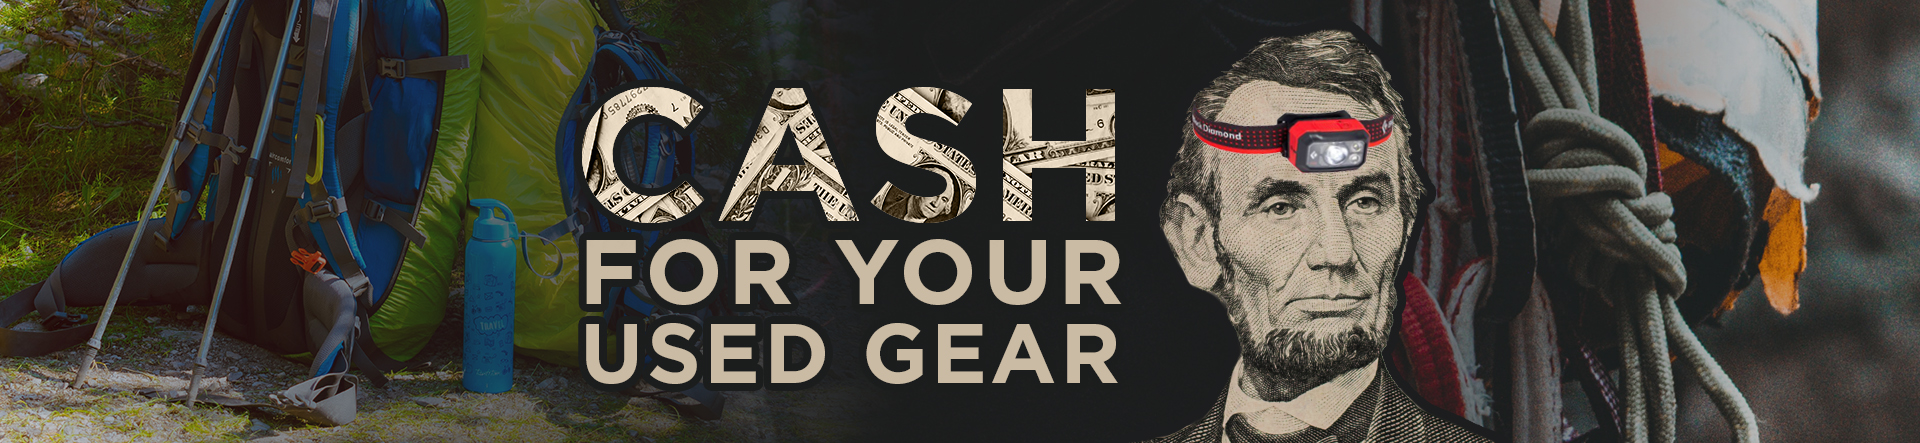 Cash for Gear in the Consignment Shop